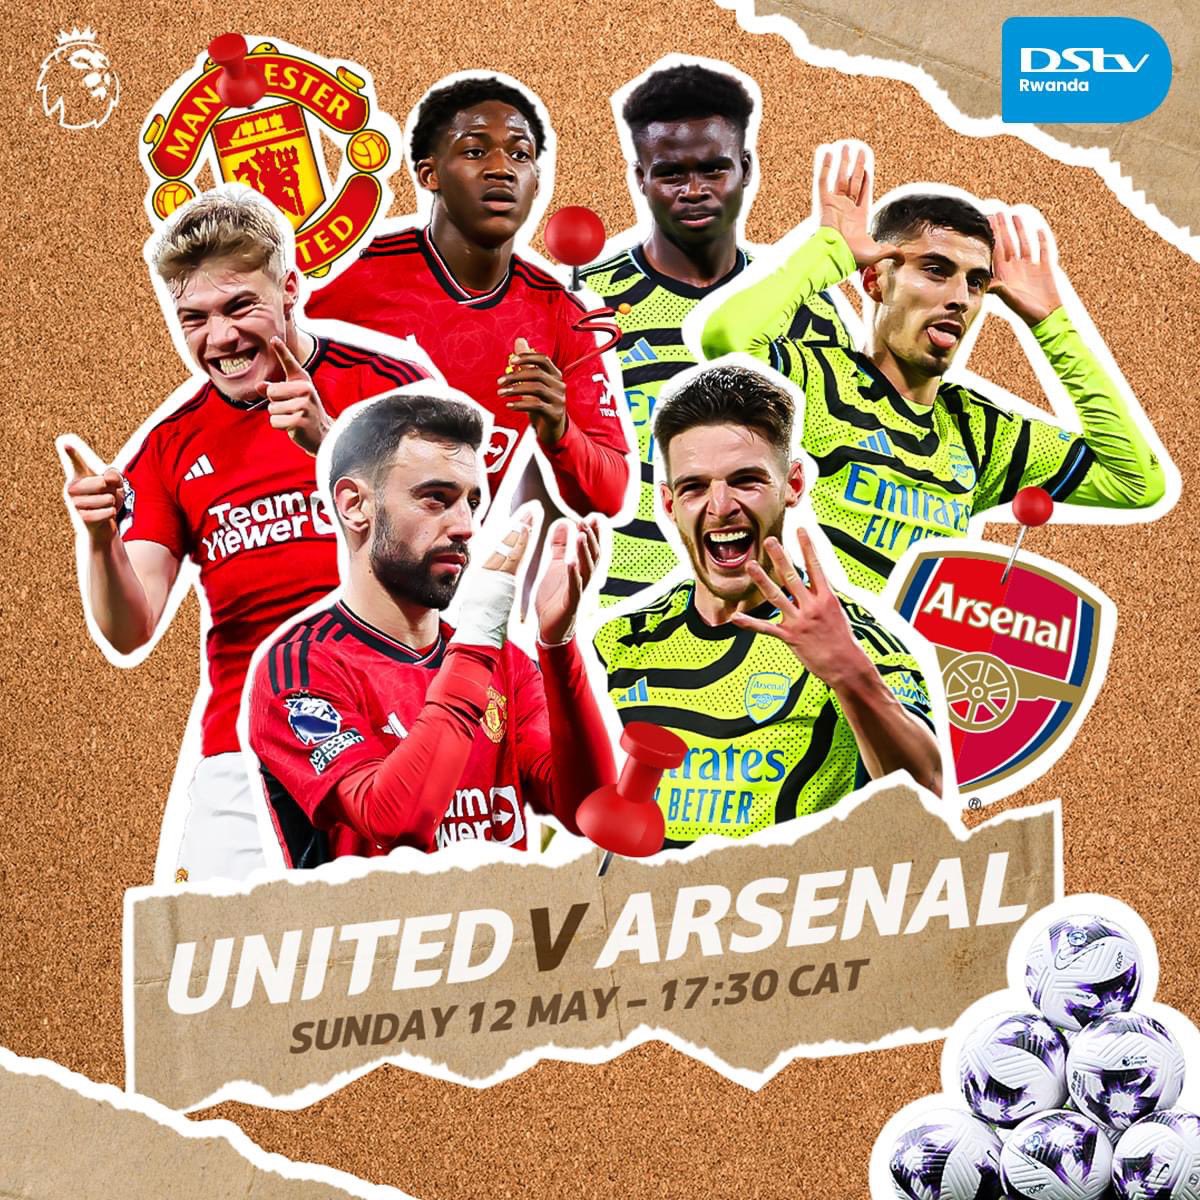 Stay connected to Dstv to witness the monumental battle between two Premier League giants! ( The Red Devils host The Gunners in a match that will determine if Arteta lifts the trophy this season. Will he be successful? Catch #ManU vs #Arsenal, live on SuperSport on Dstv.